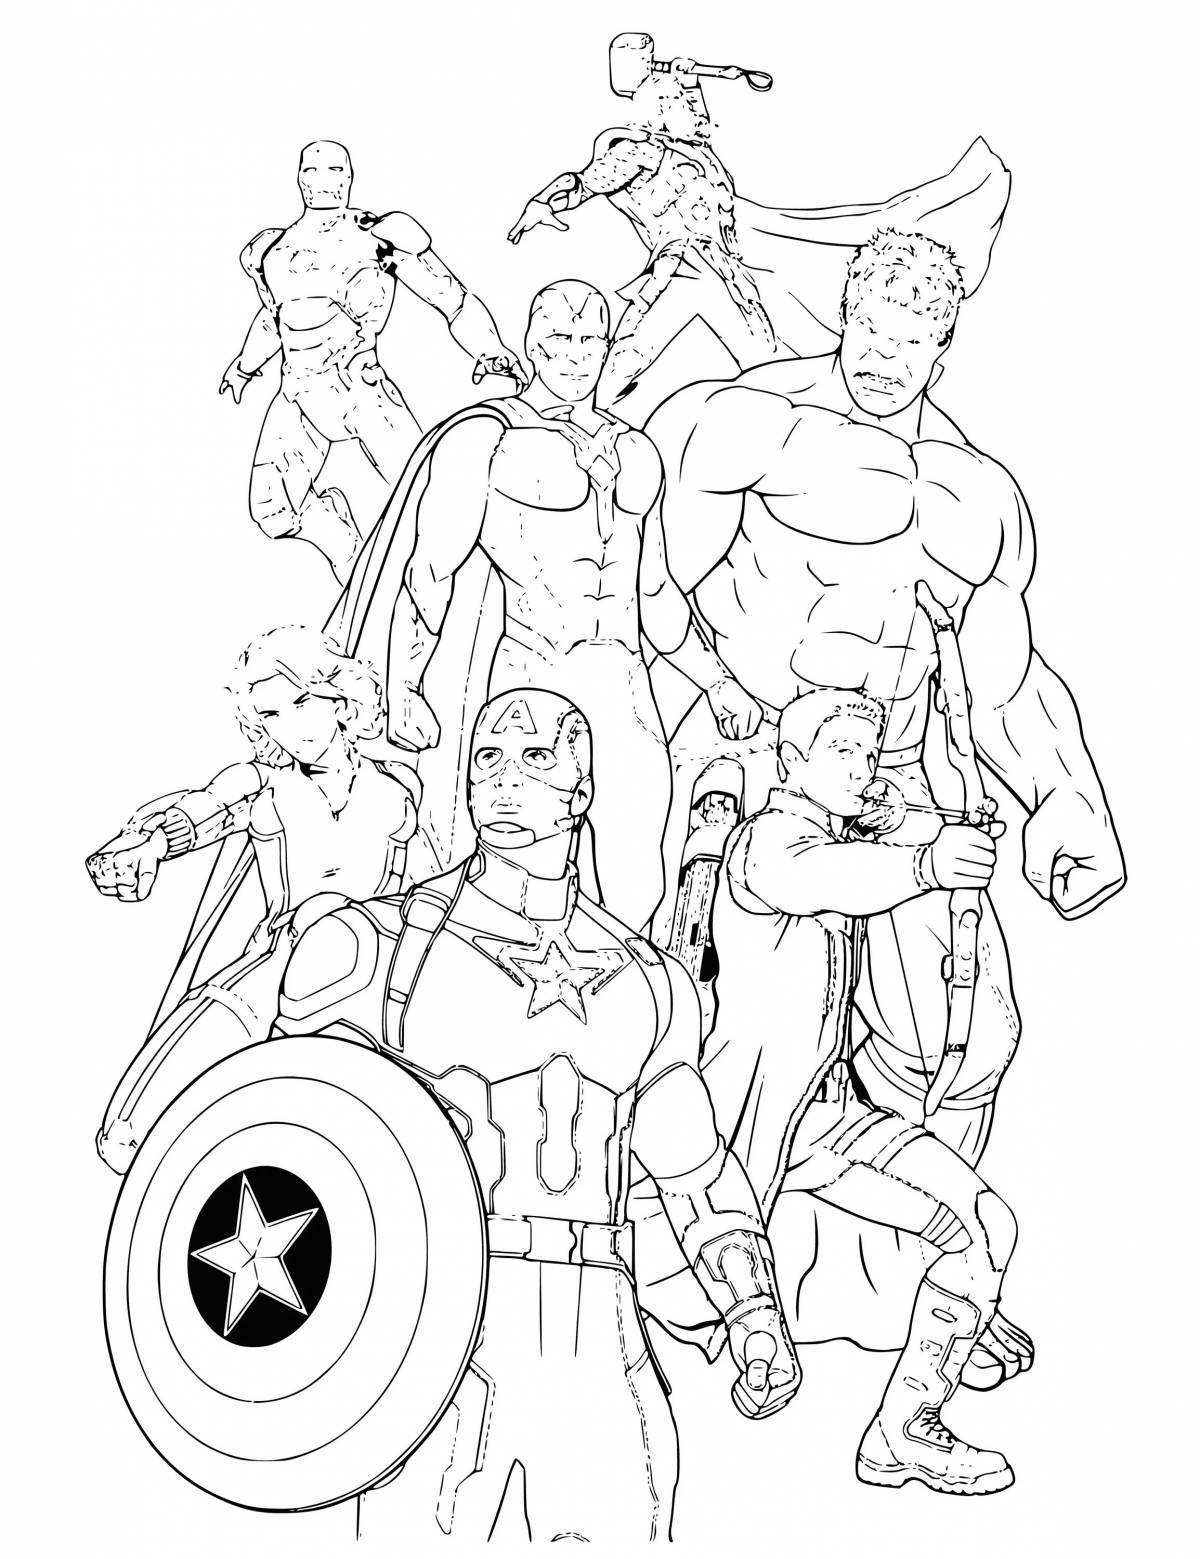 Great coloring super heroes whole team